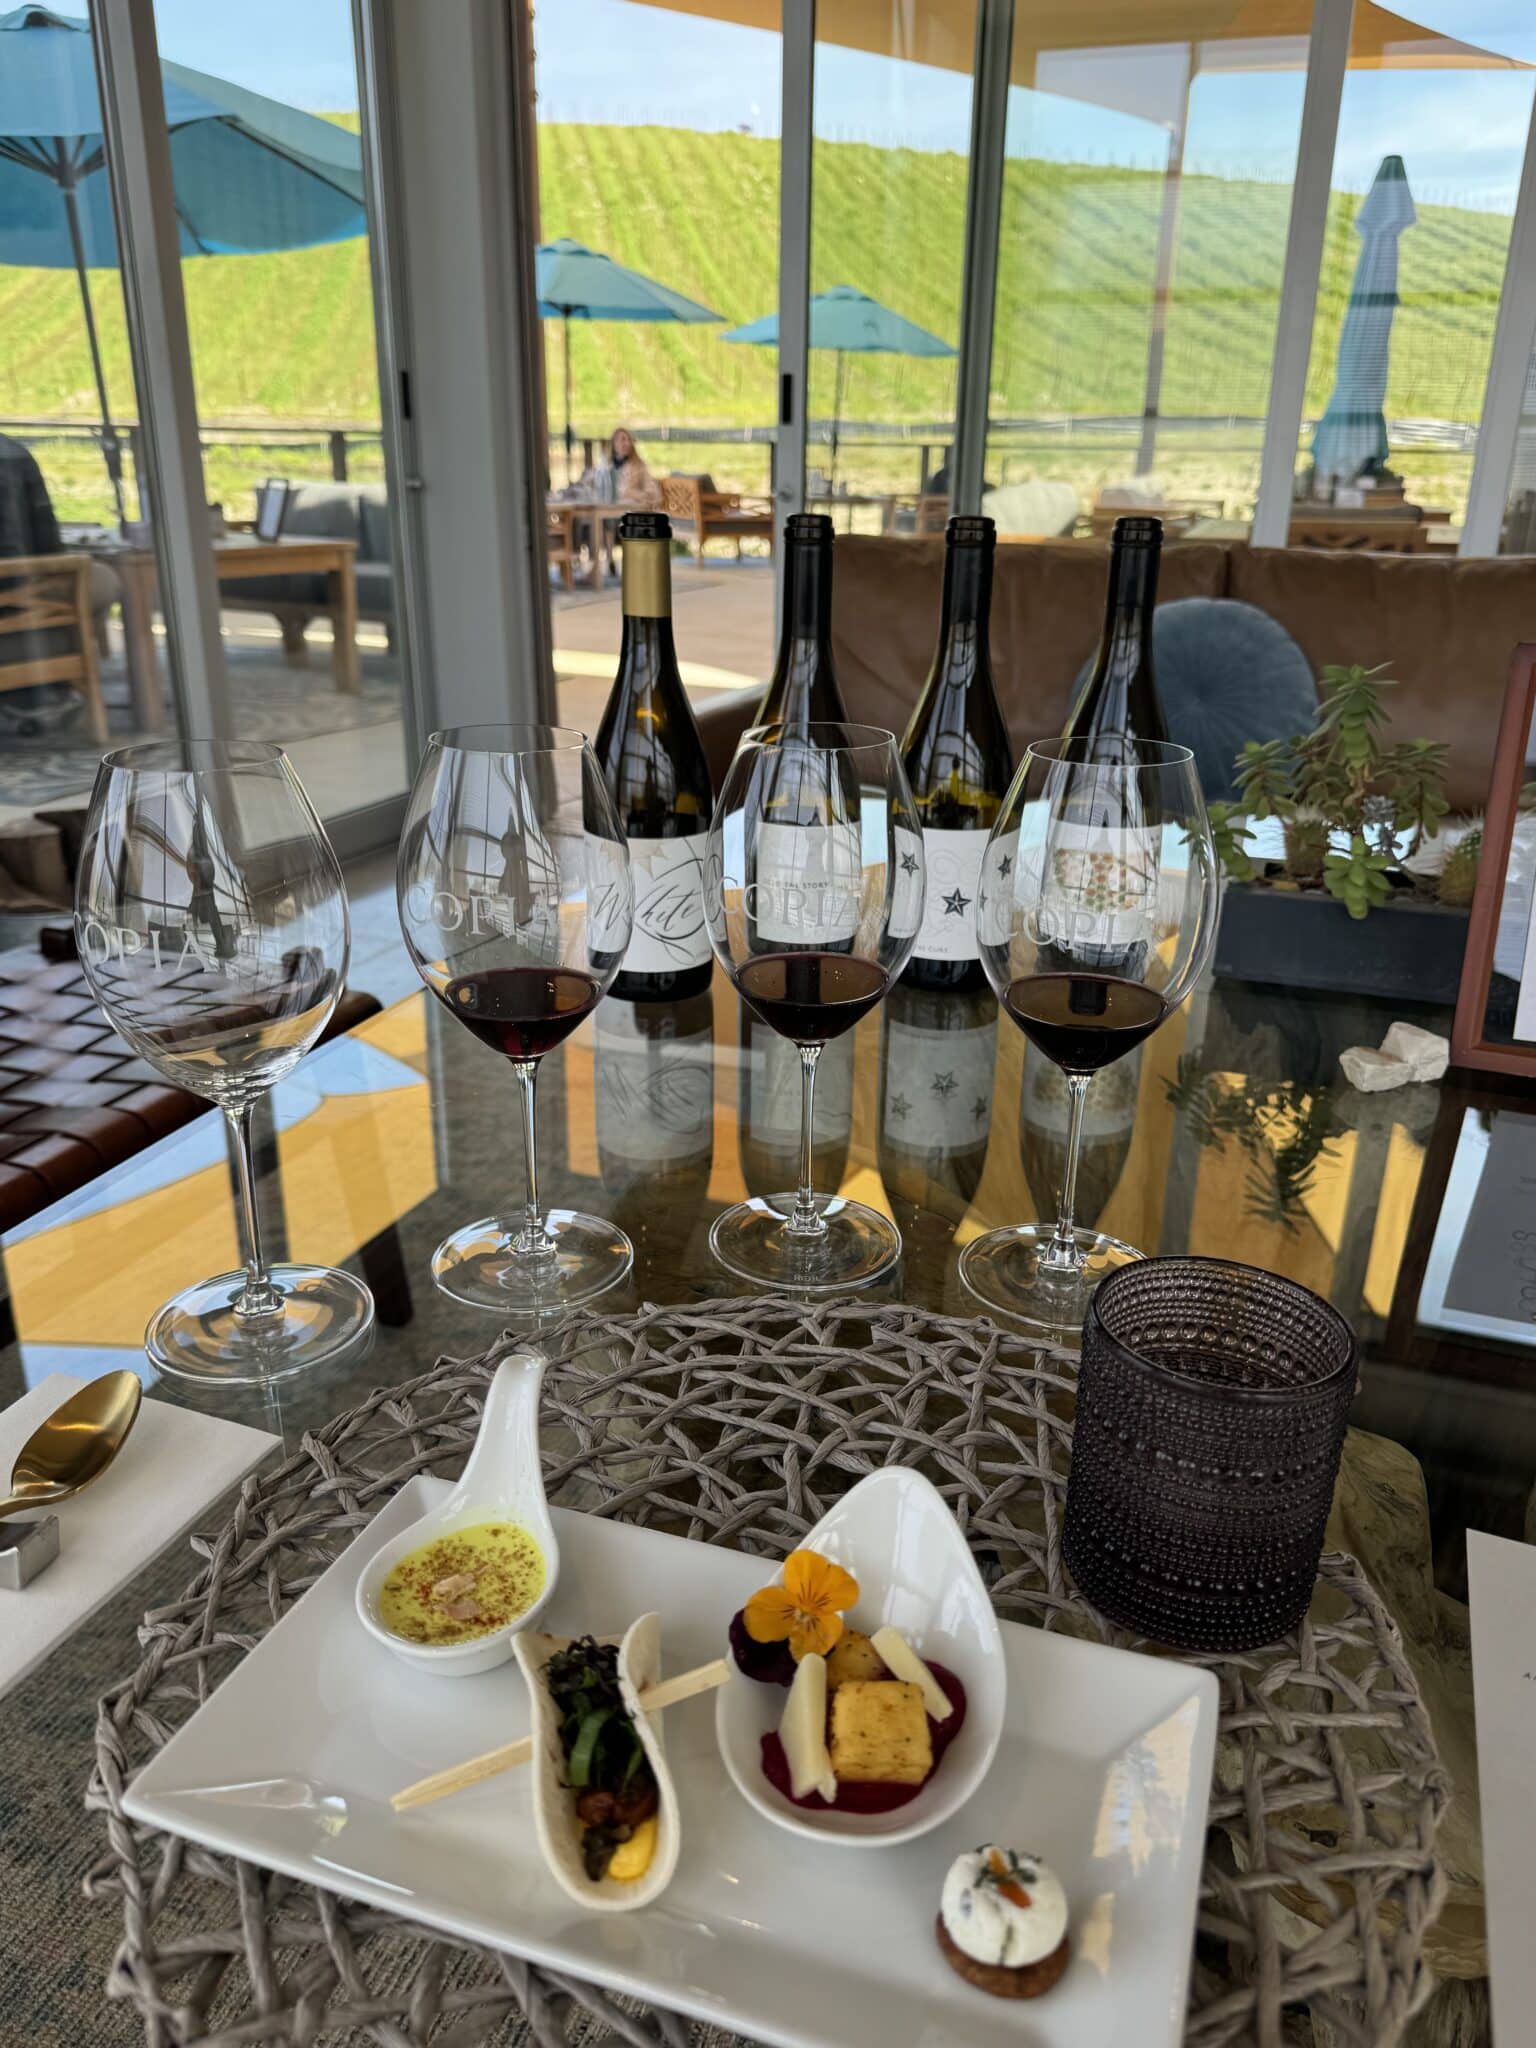 wine and food pairing at Copia Vineyards in Paso Robles, California